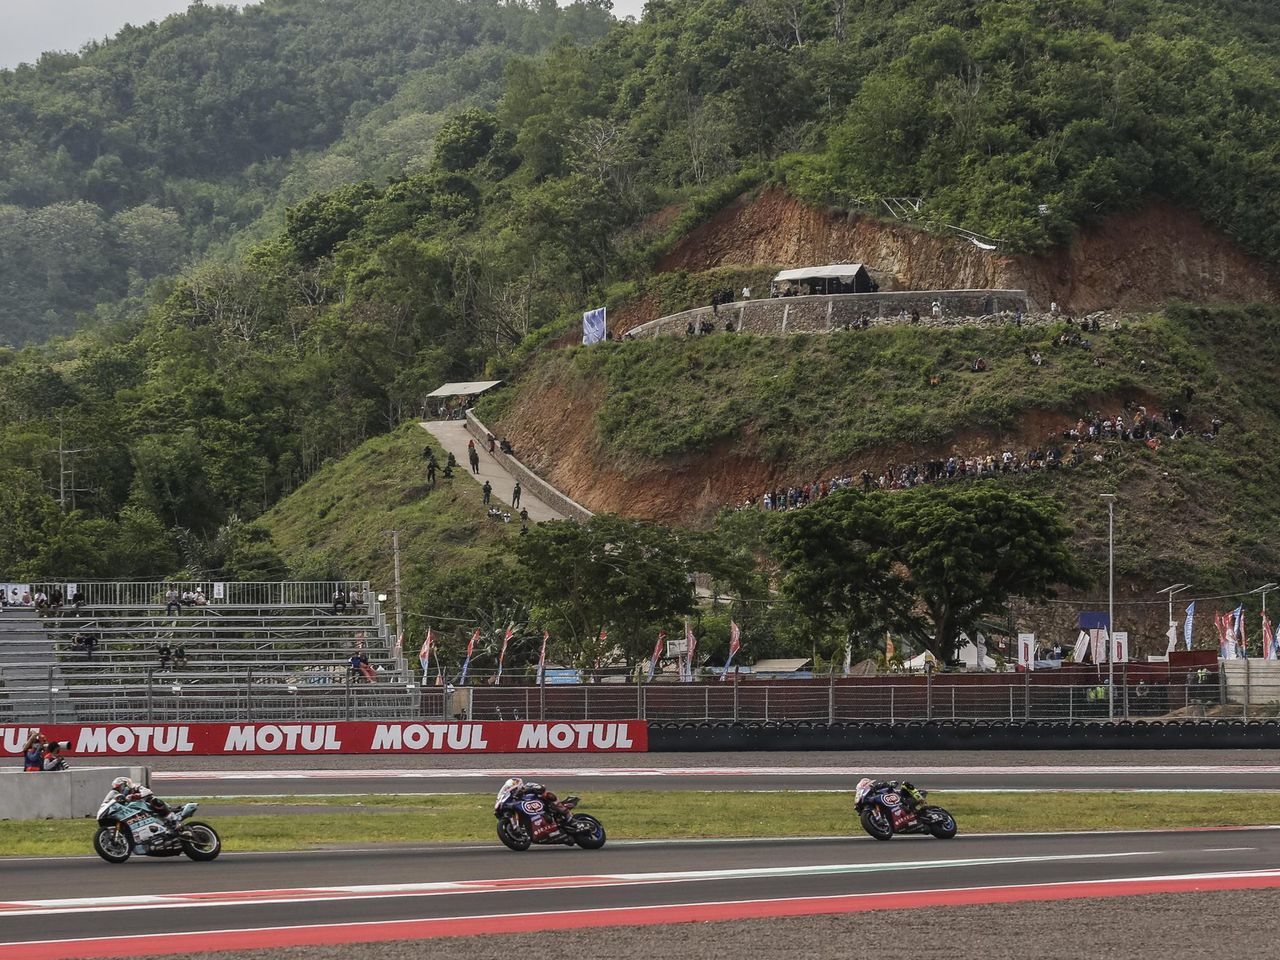 Race 1 of final World Superbike round pushed back to Sunday due to terrible weather in Indonesia